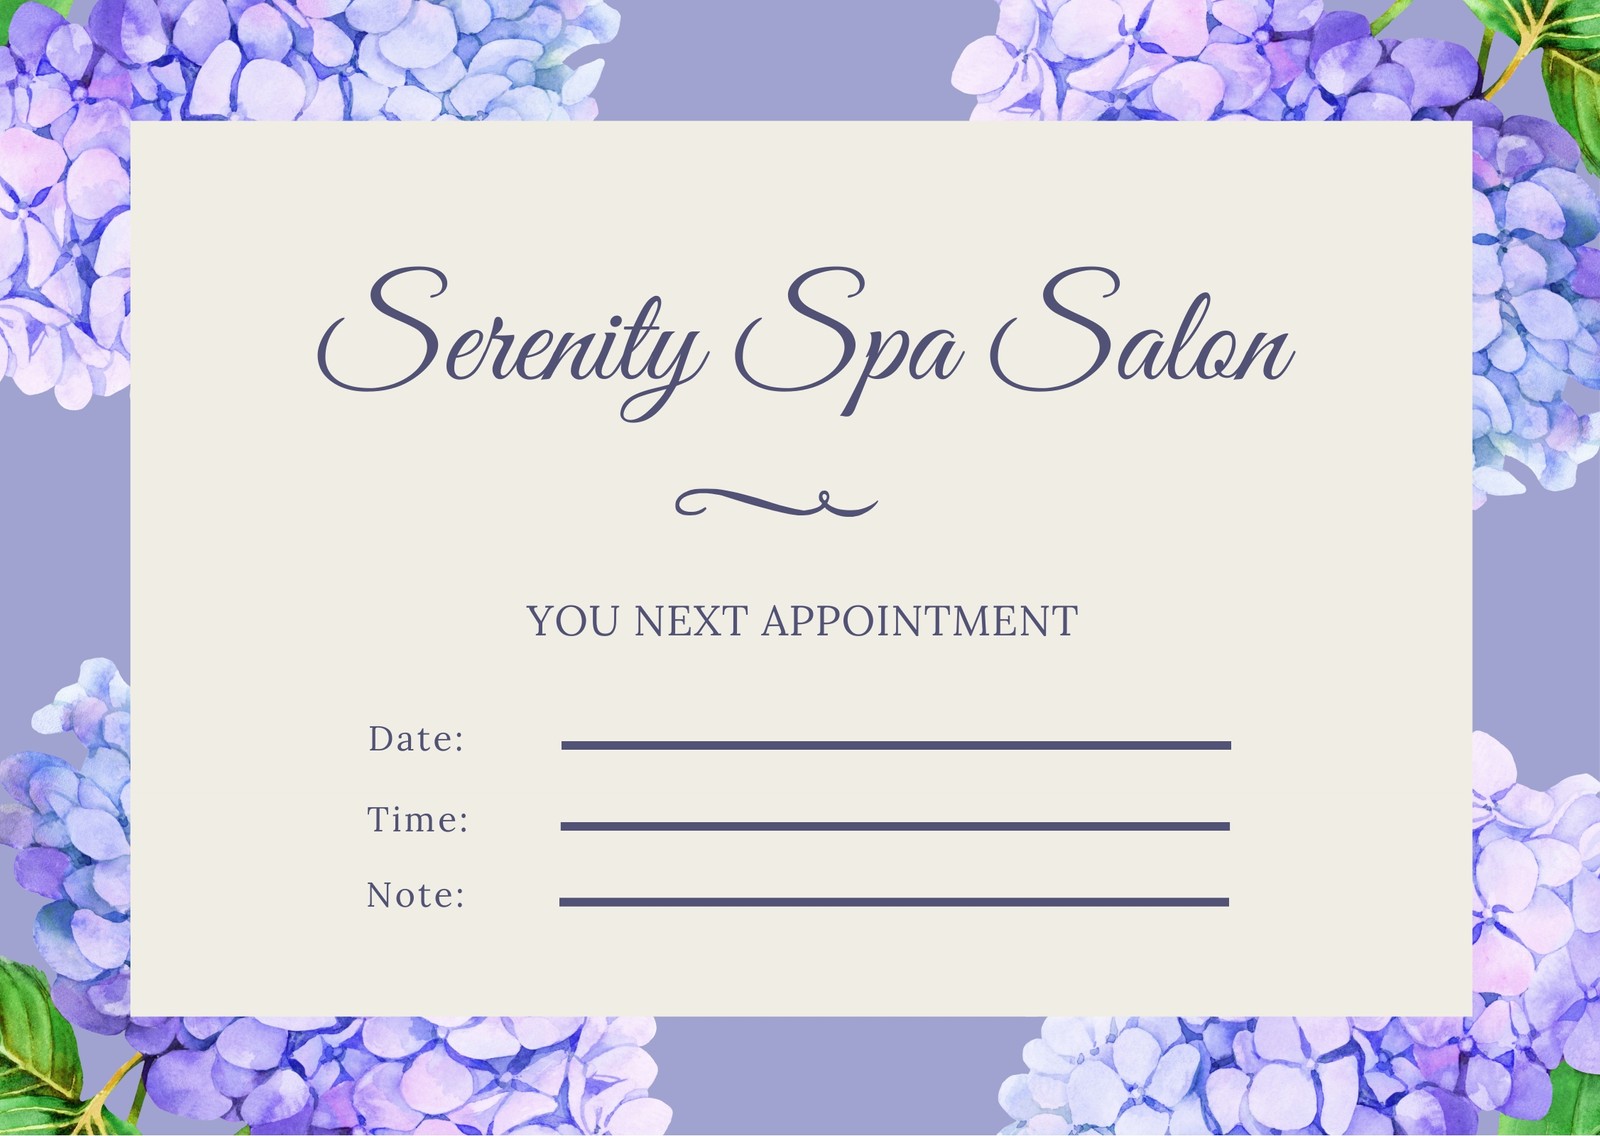 Free Printable Customizable Appointment Card Templates Canva